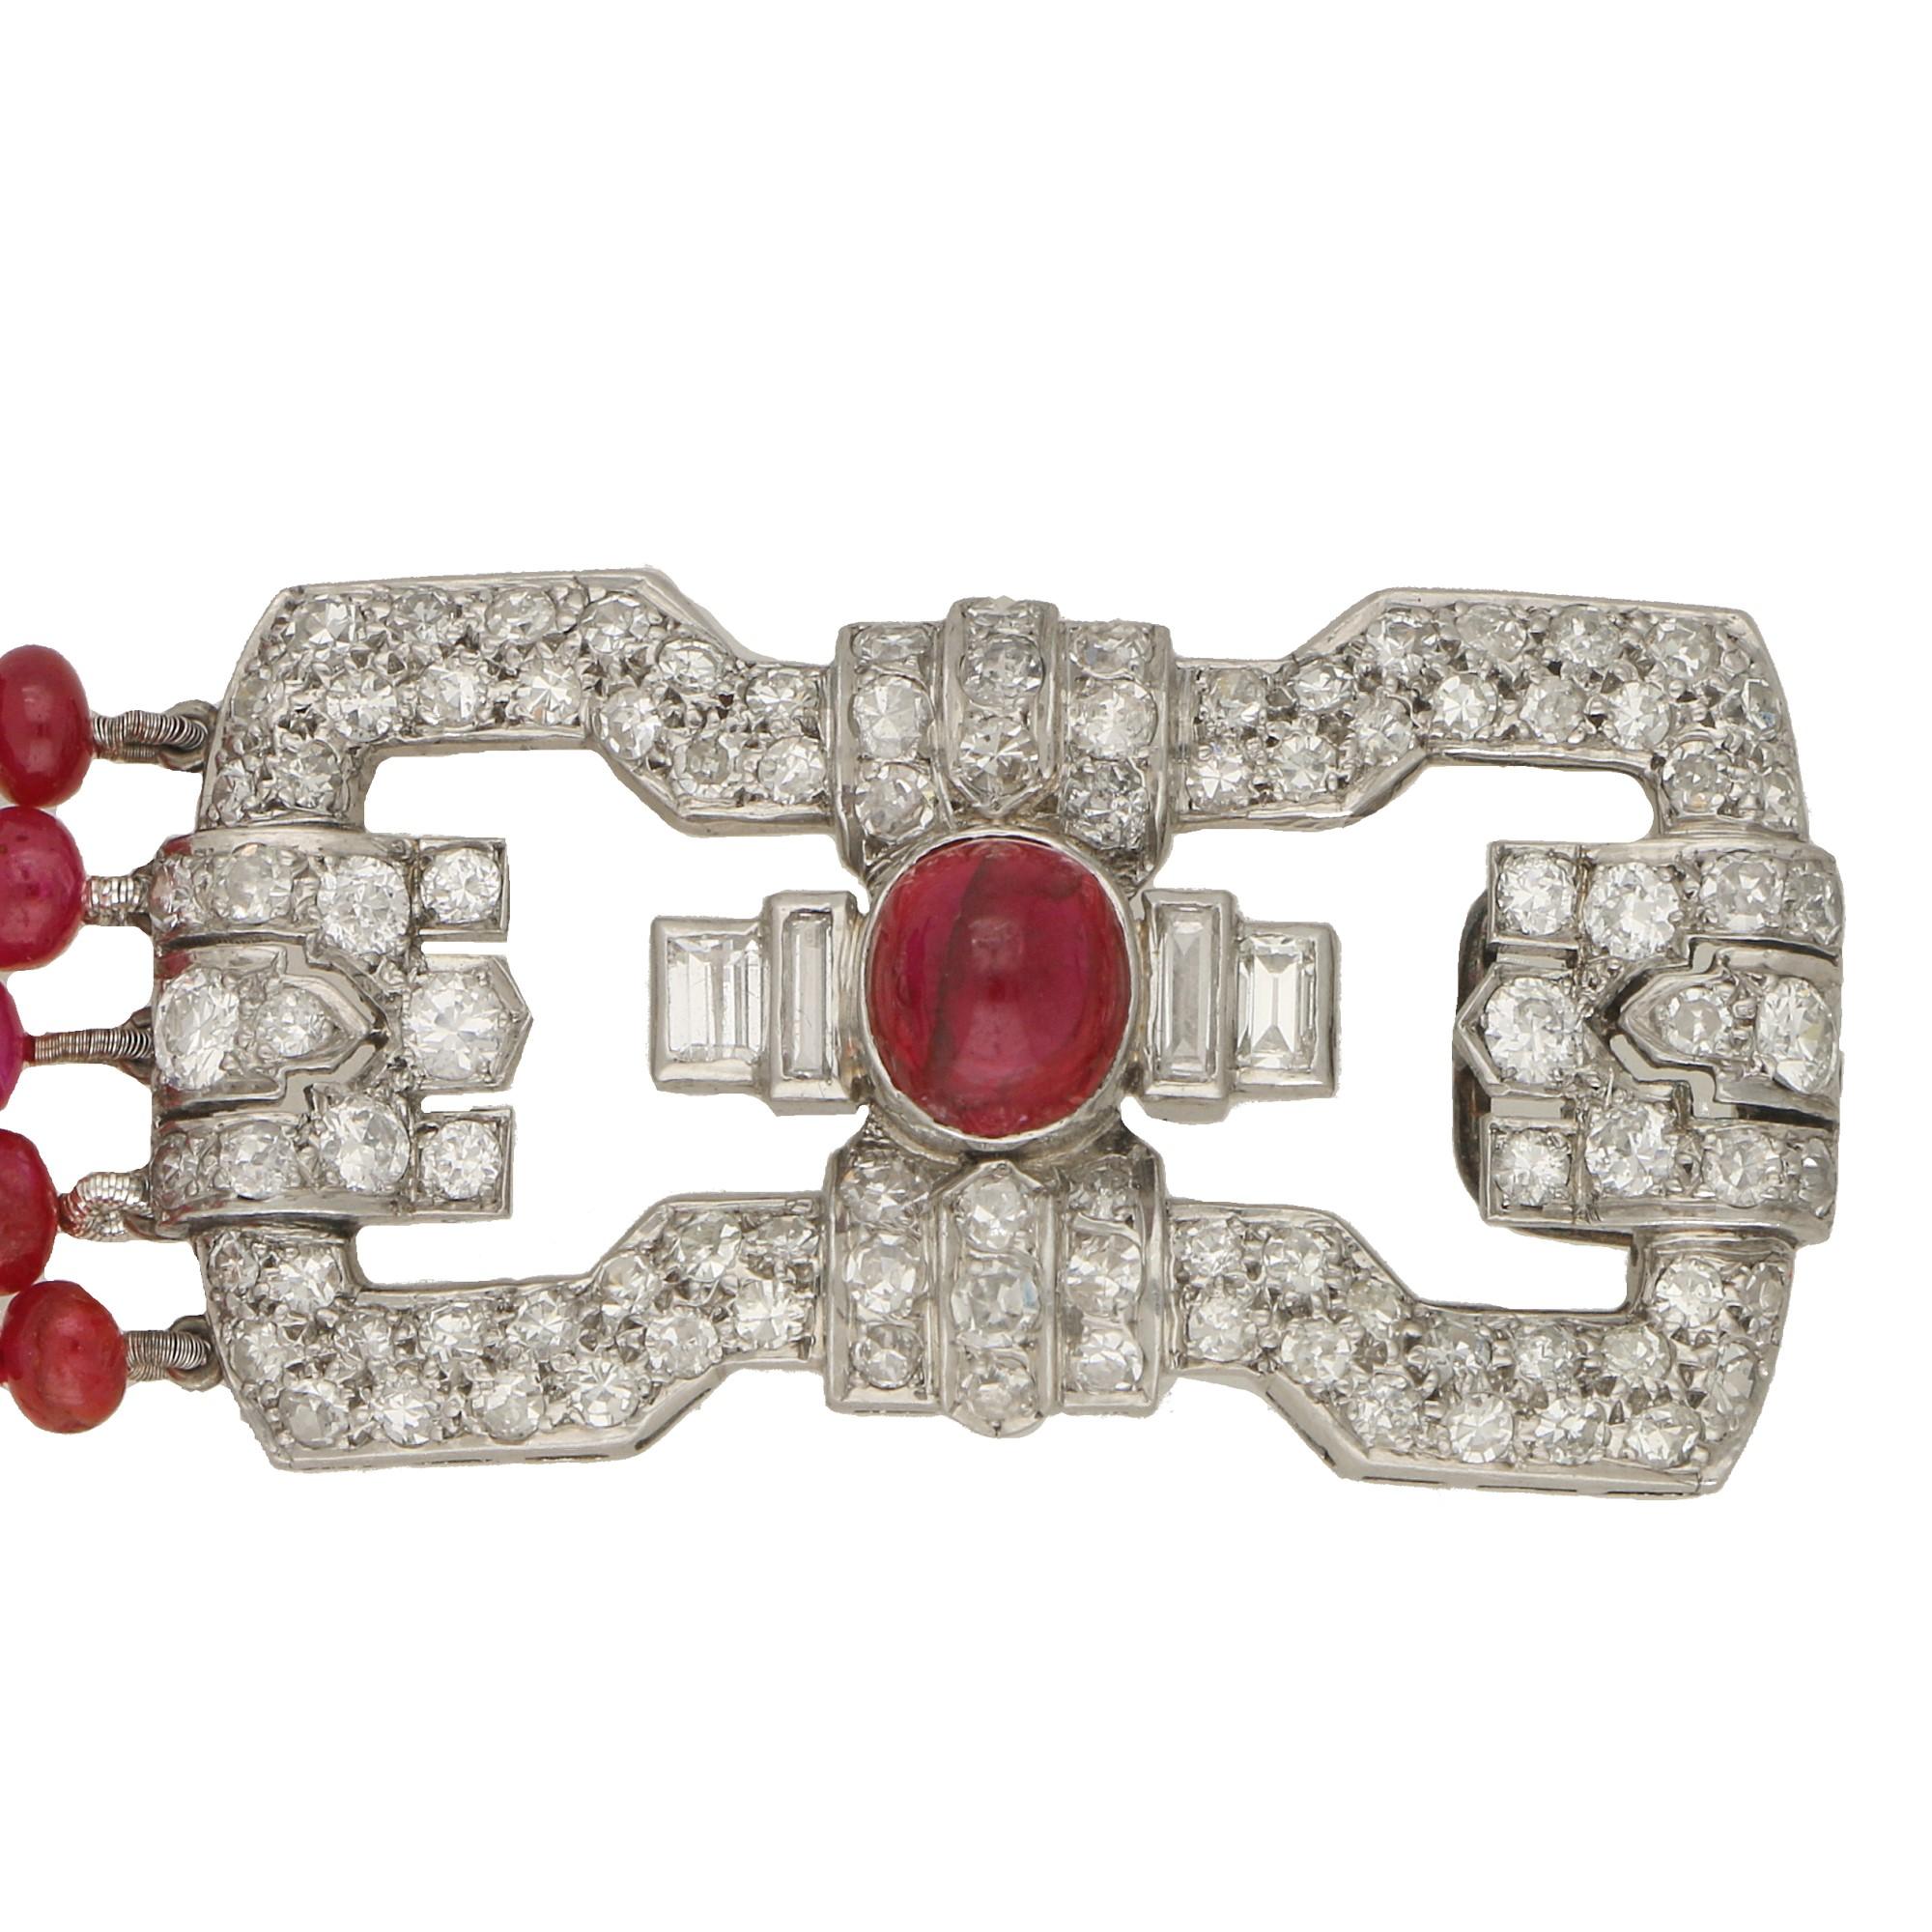 A beautiful Art Deco ruby and diamond beaded bracelet set and fastened with a geometric platinum clasp. 

The bracelet is estimated to be from the early 1930's and is composed of five strands of polished cabochon ruby beads. The beads range from a